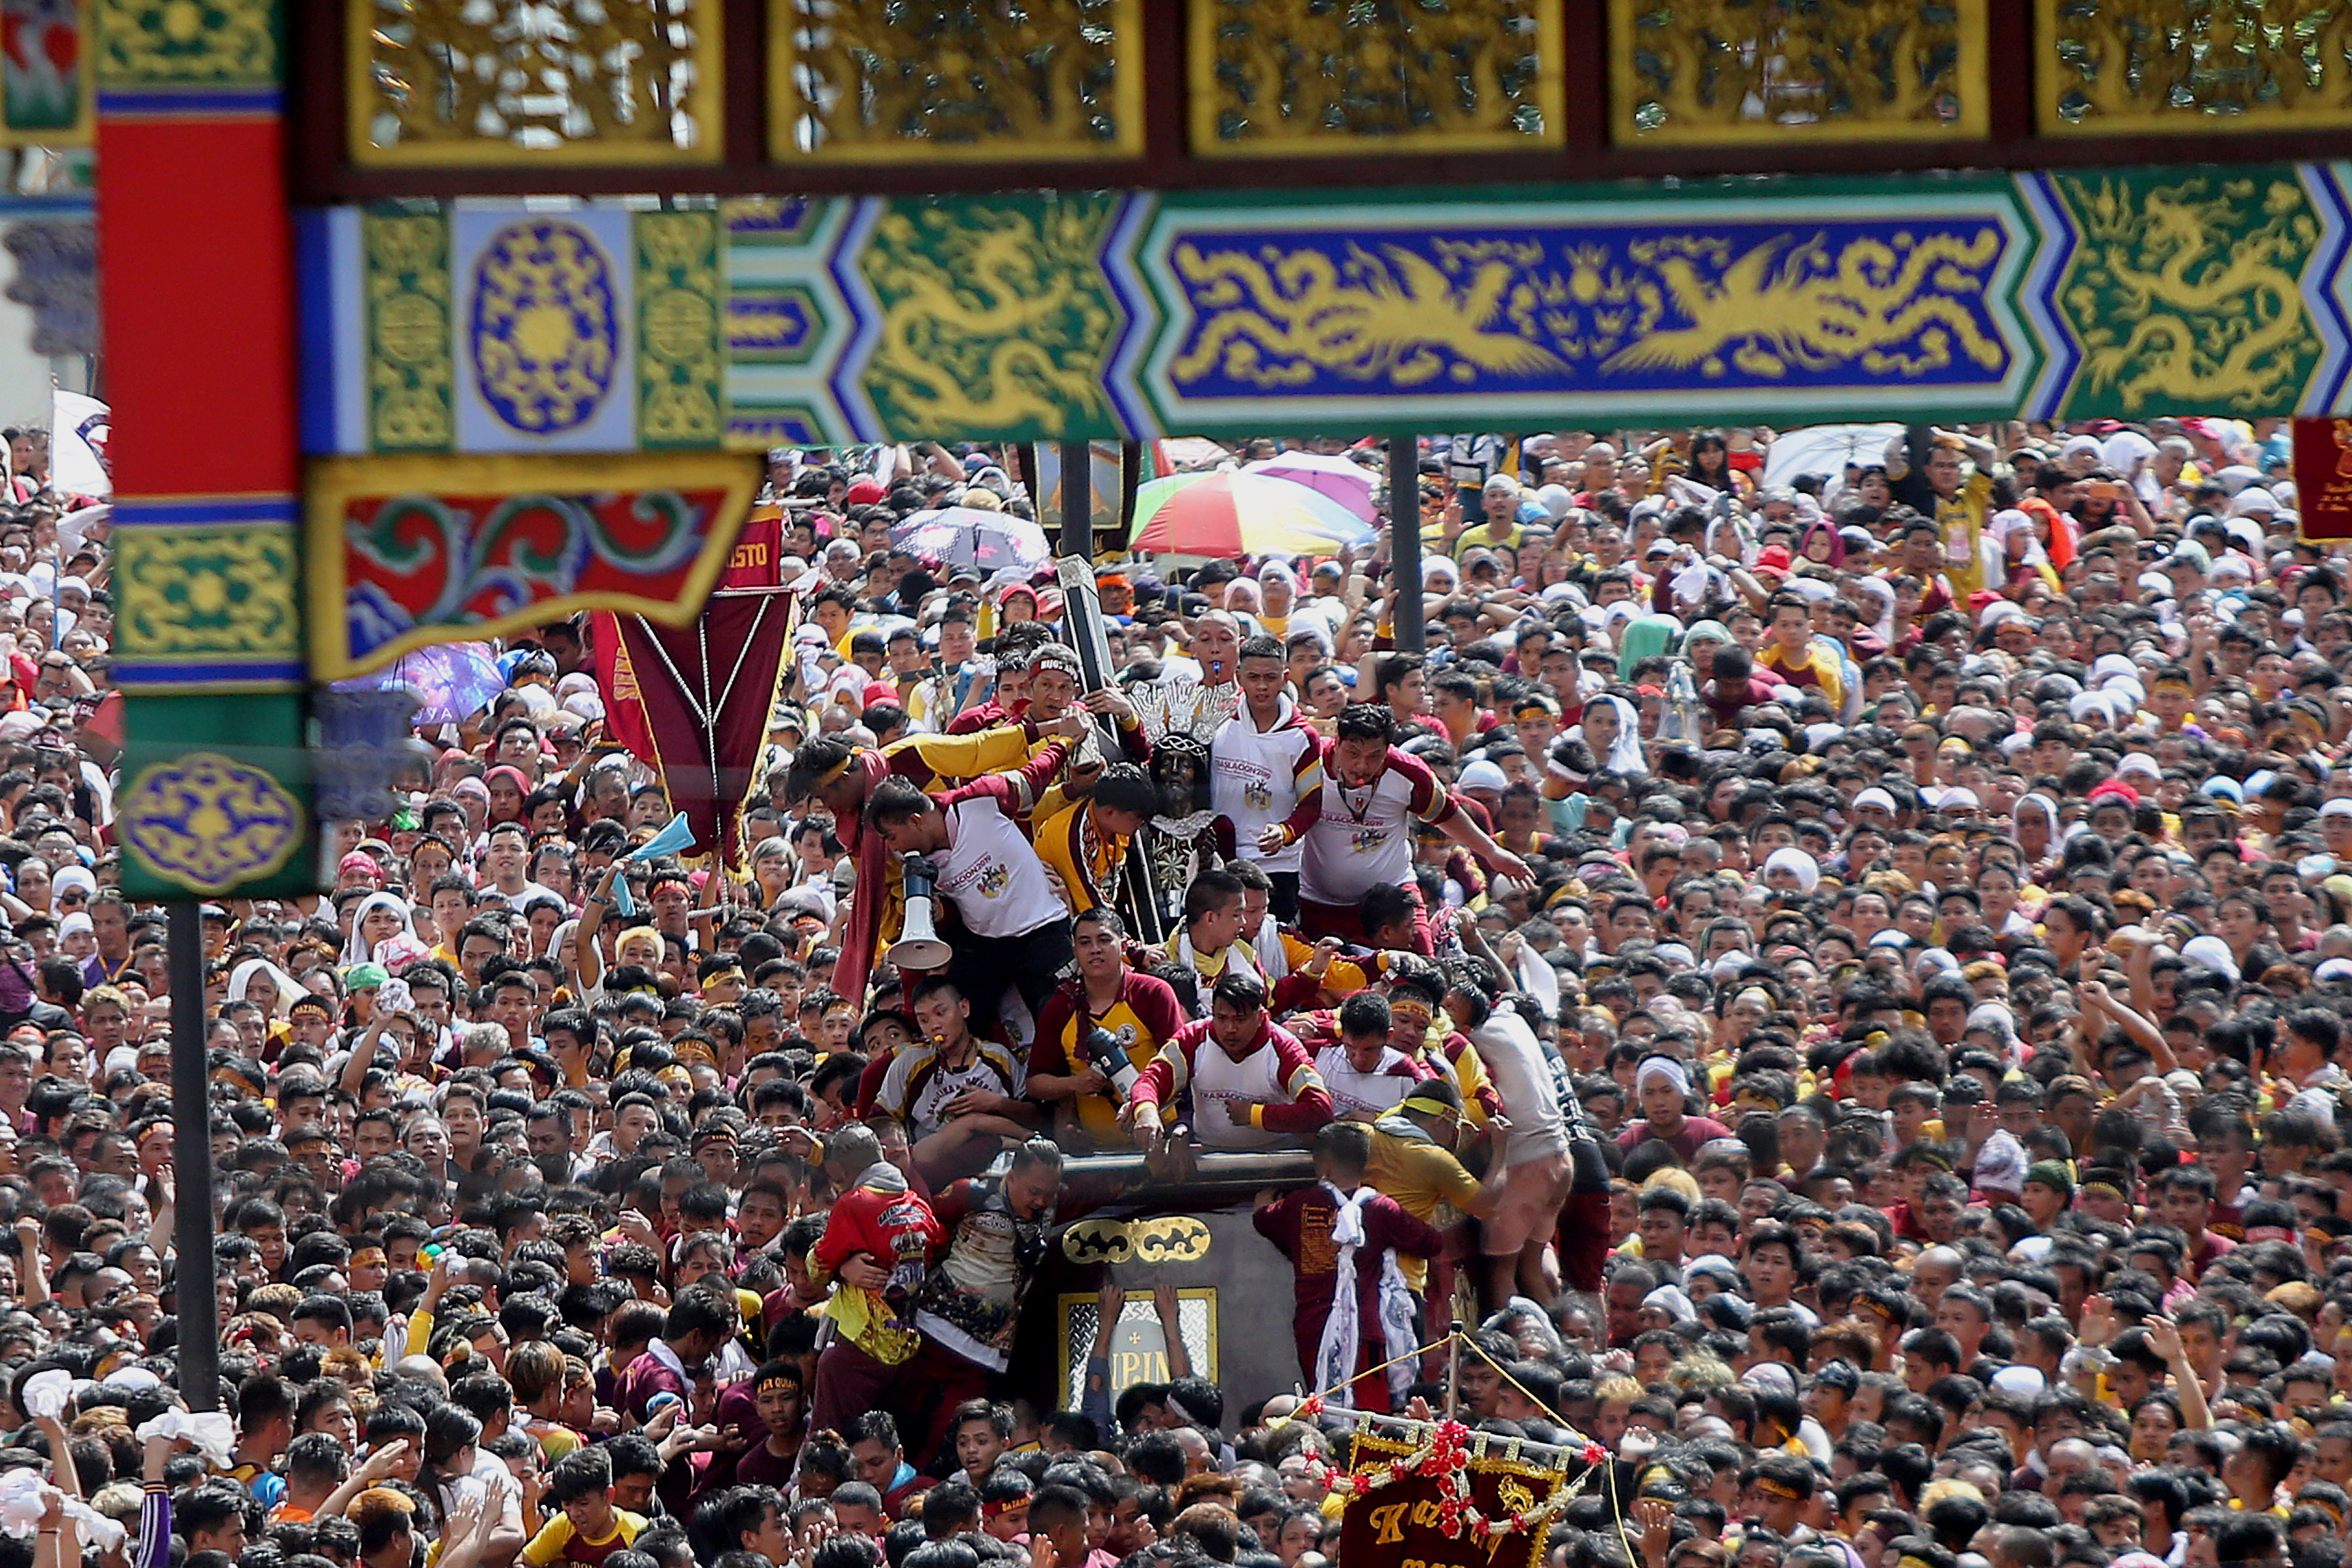 Devotees try to touch the life-size statue of the Black Nazarene 